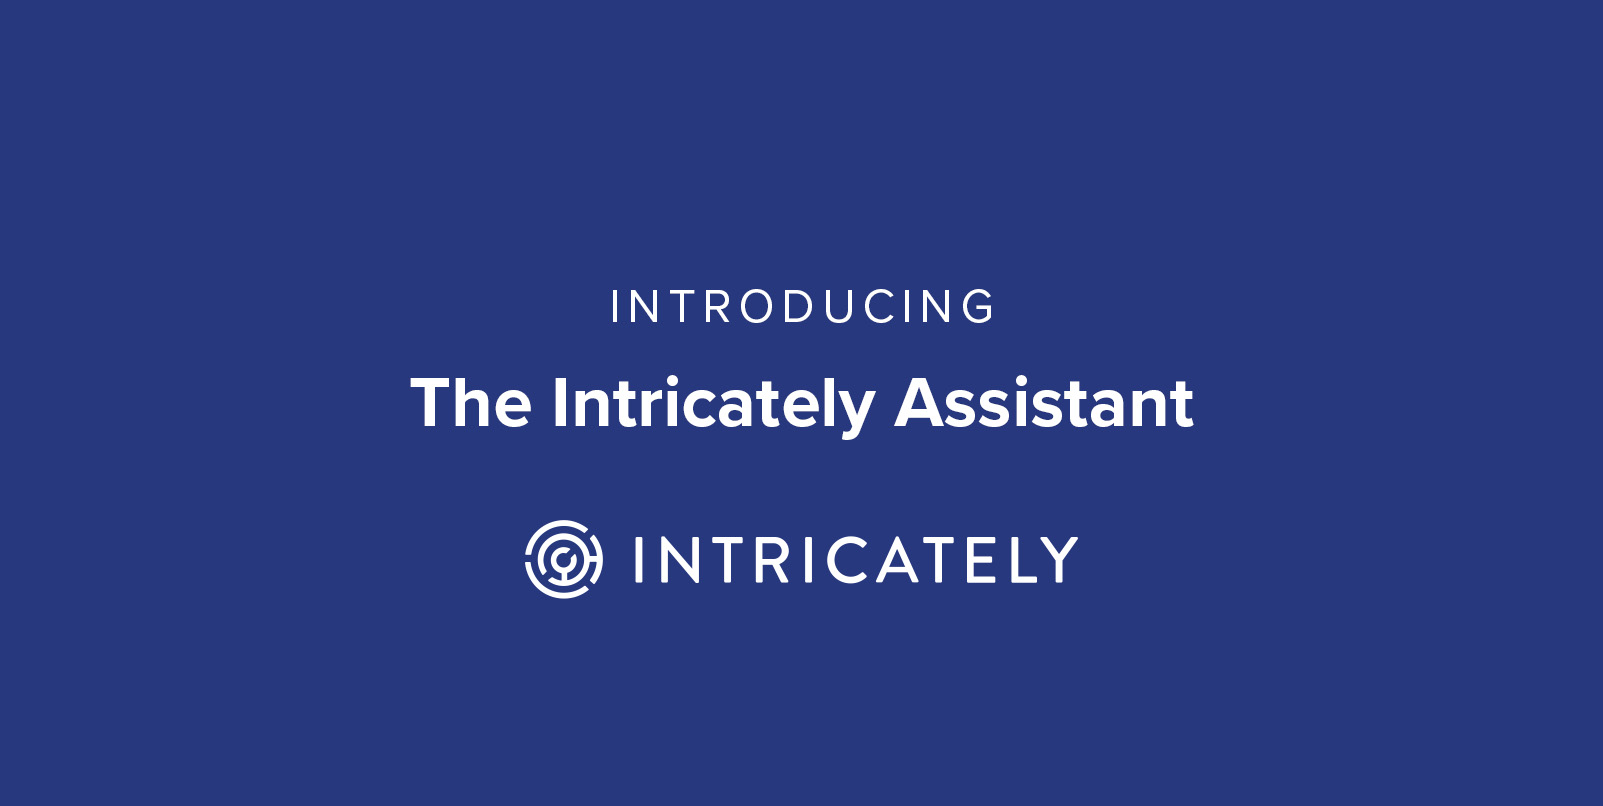 The Intricately Assistant